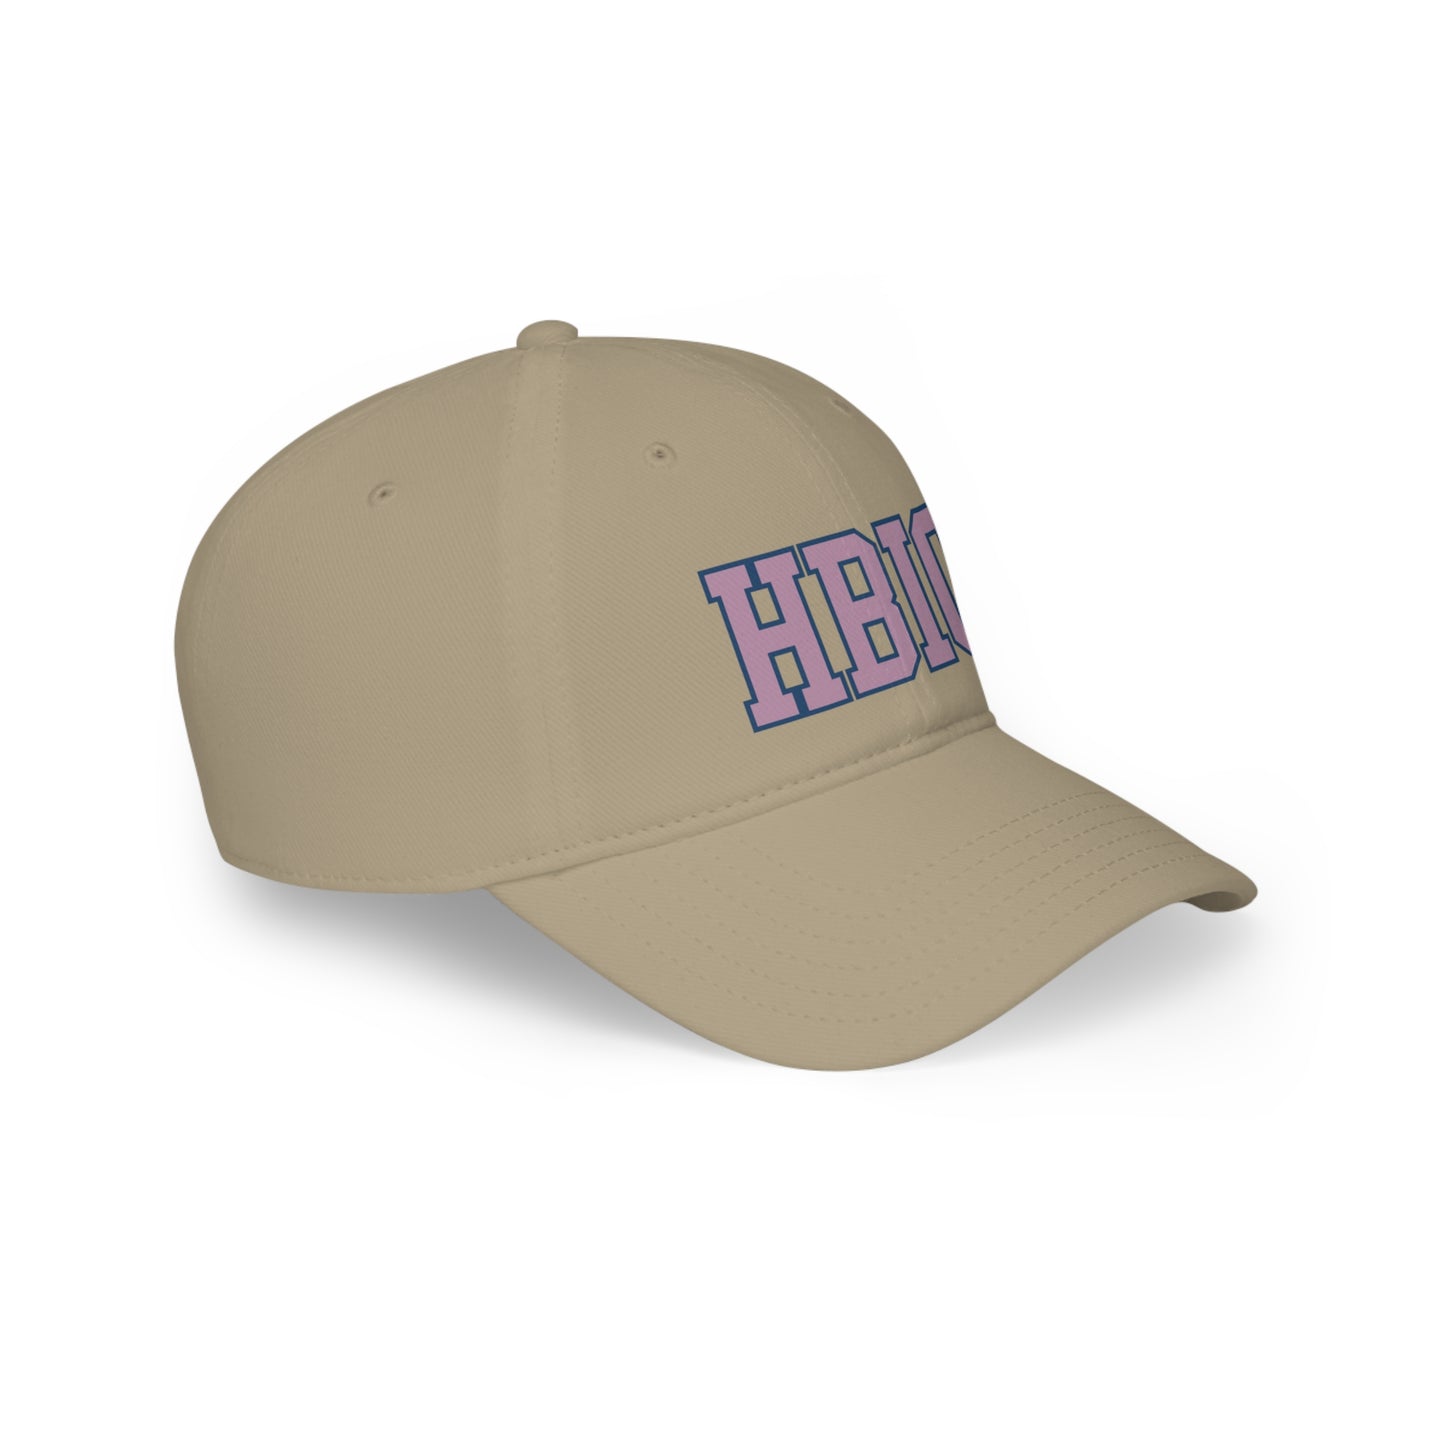 "HBIC" (Head B**** In Charge) Hat